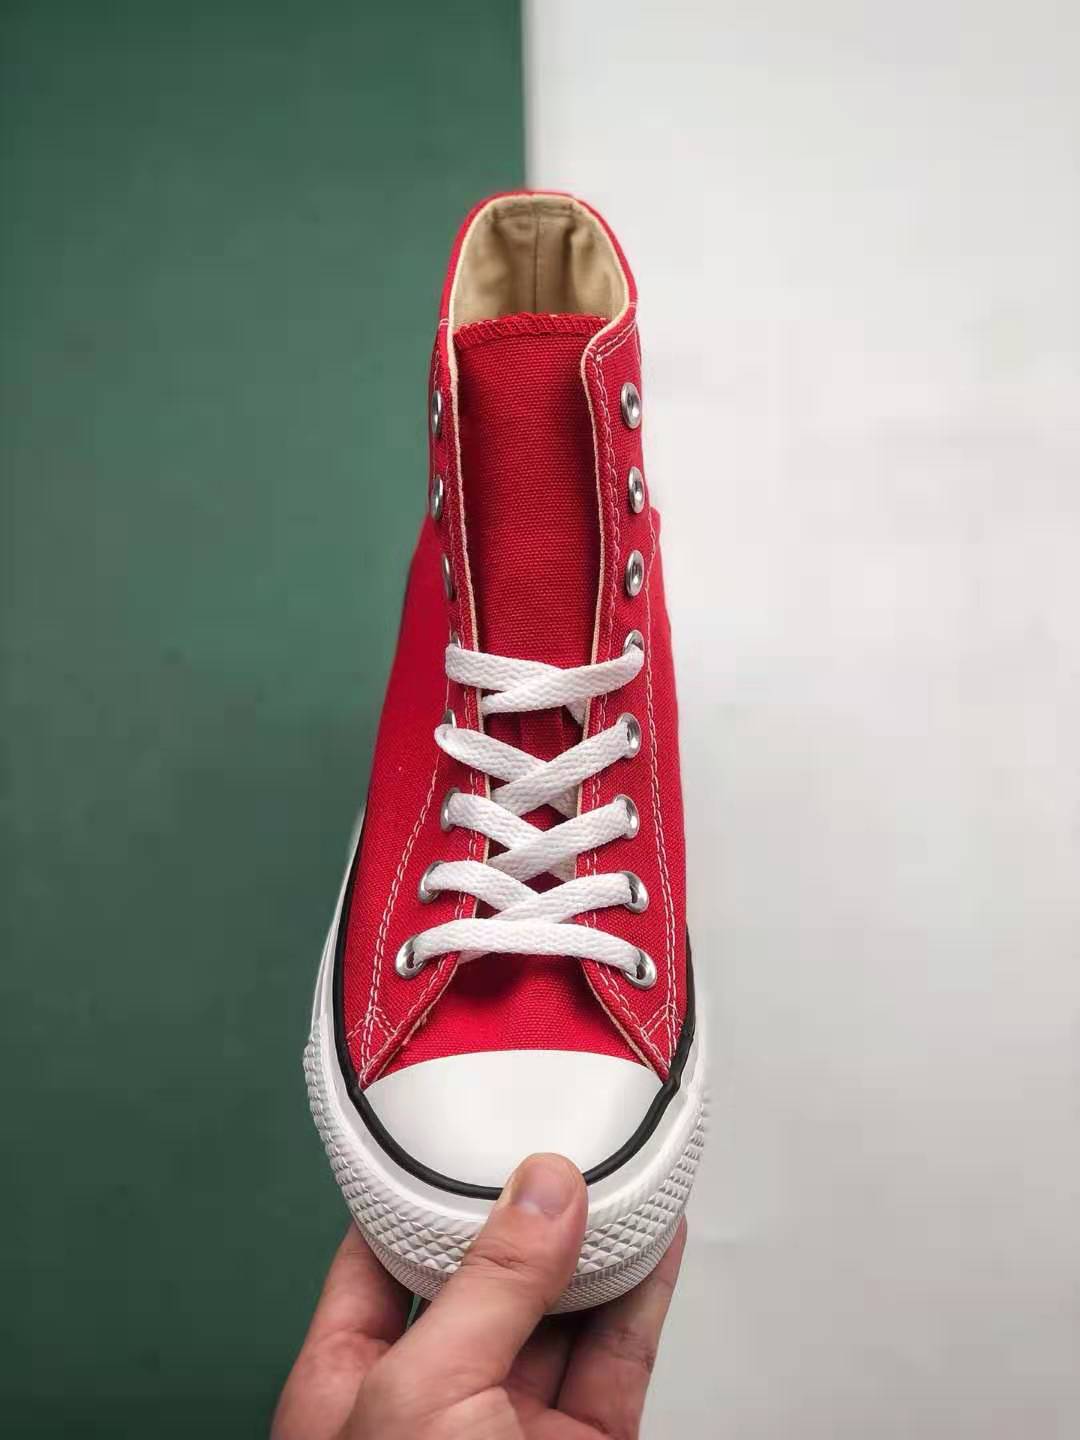 Converse Chuck Taylor All Star 101013 - Classic Canvas Sneakers for All-Day Comfort